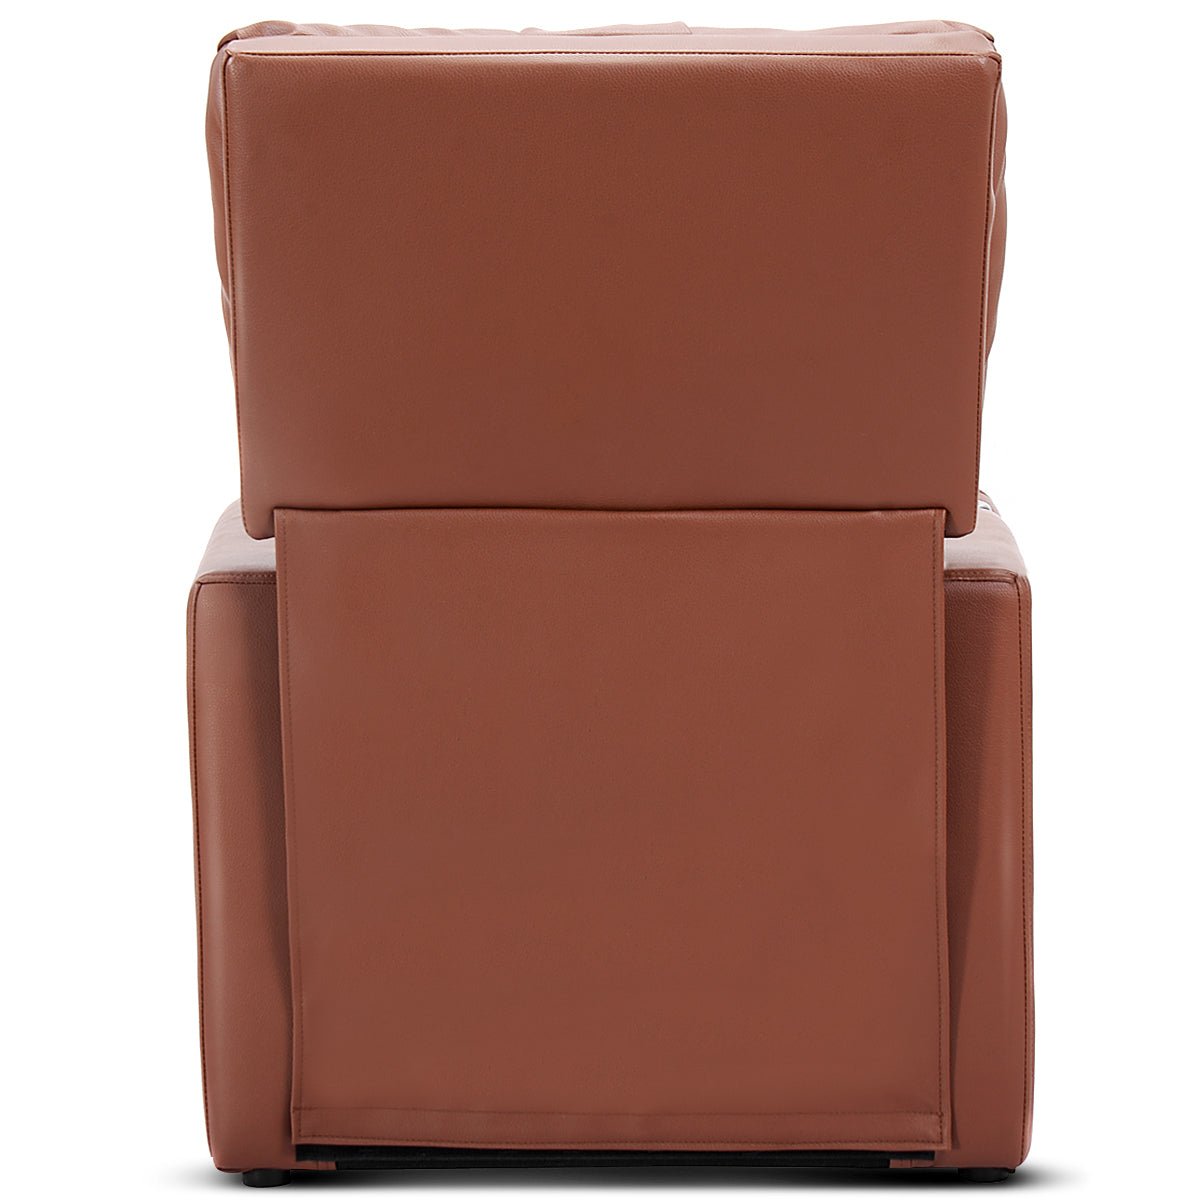 Kids Lounge Chair: Comfortably Adjustable with High Backrest and Armrest - Brown